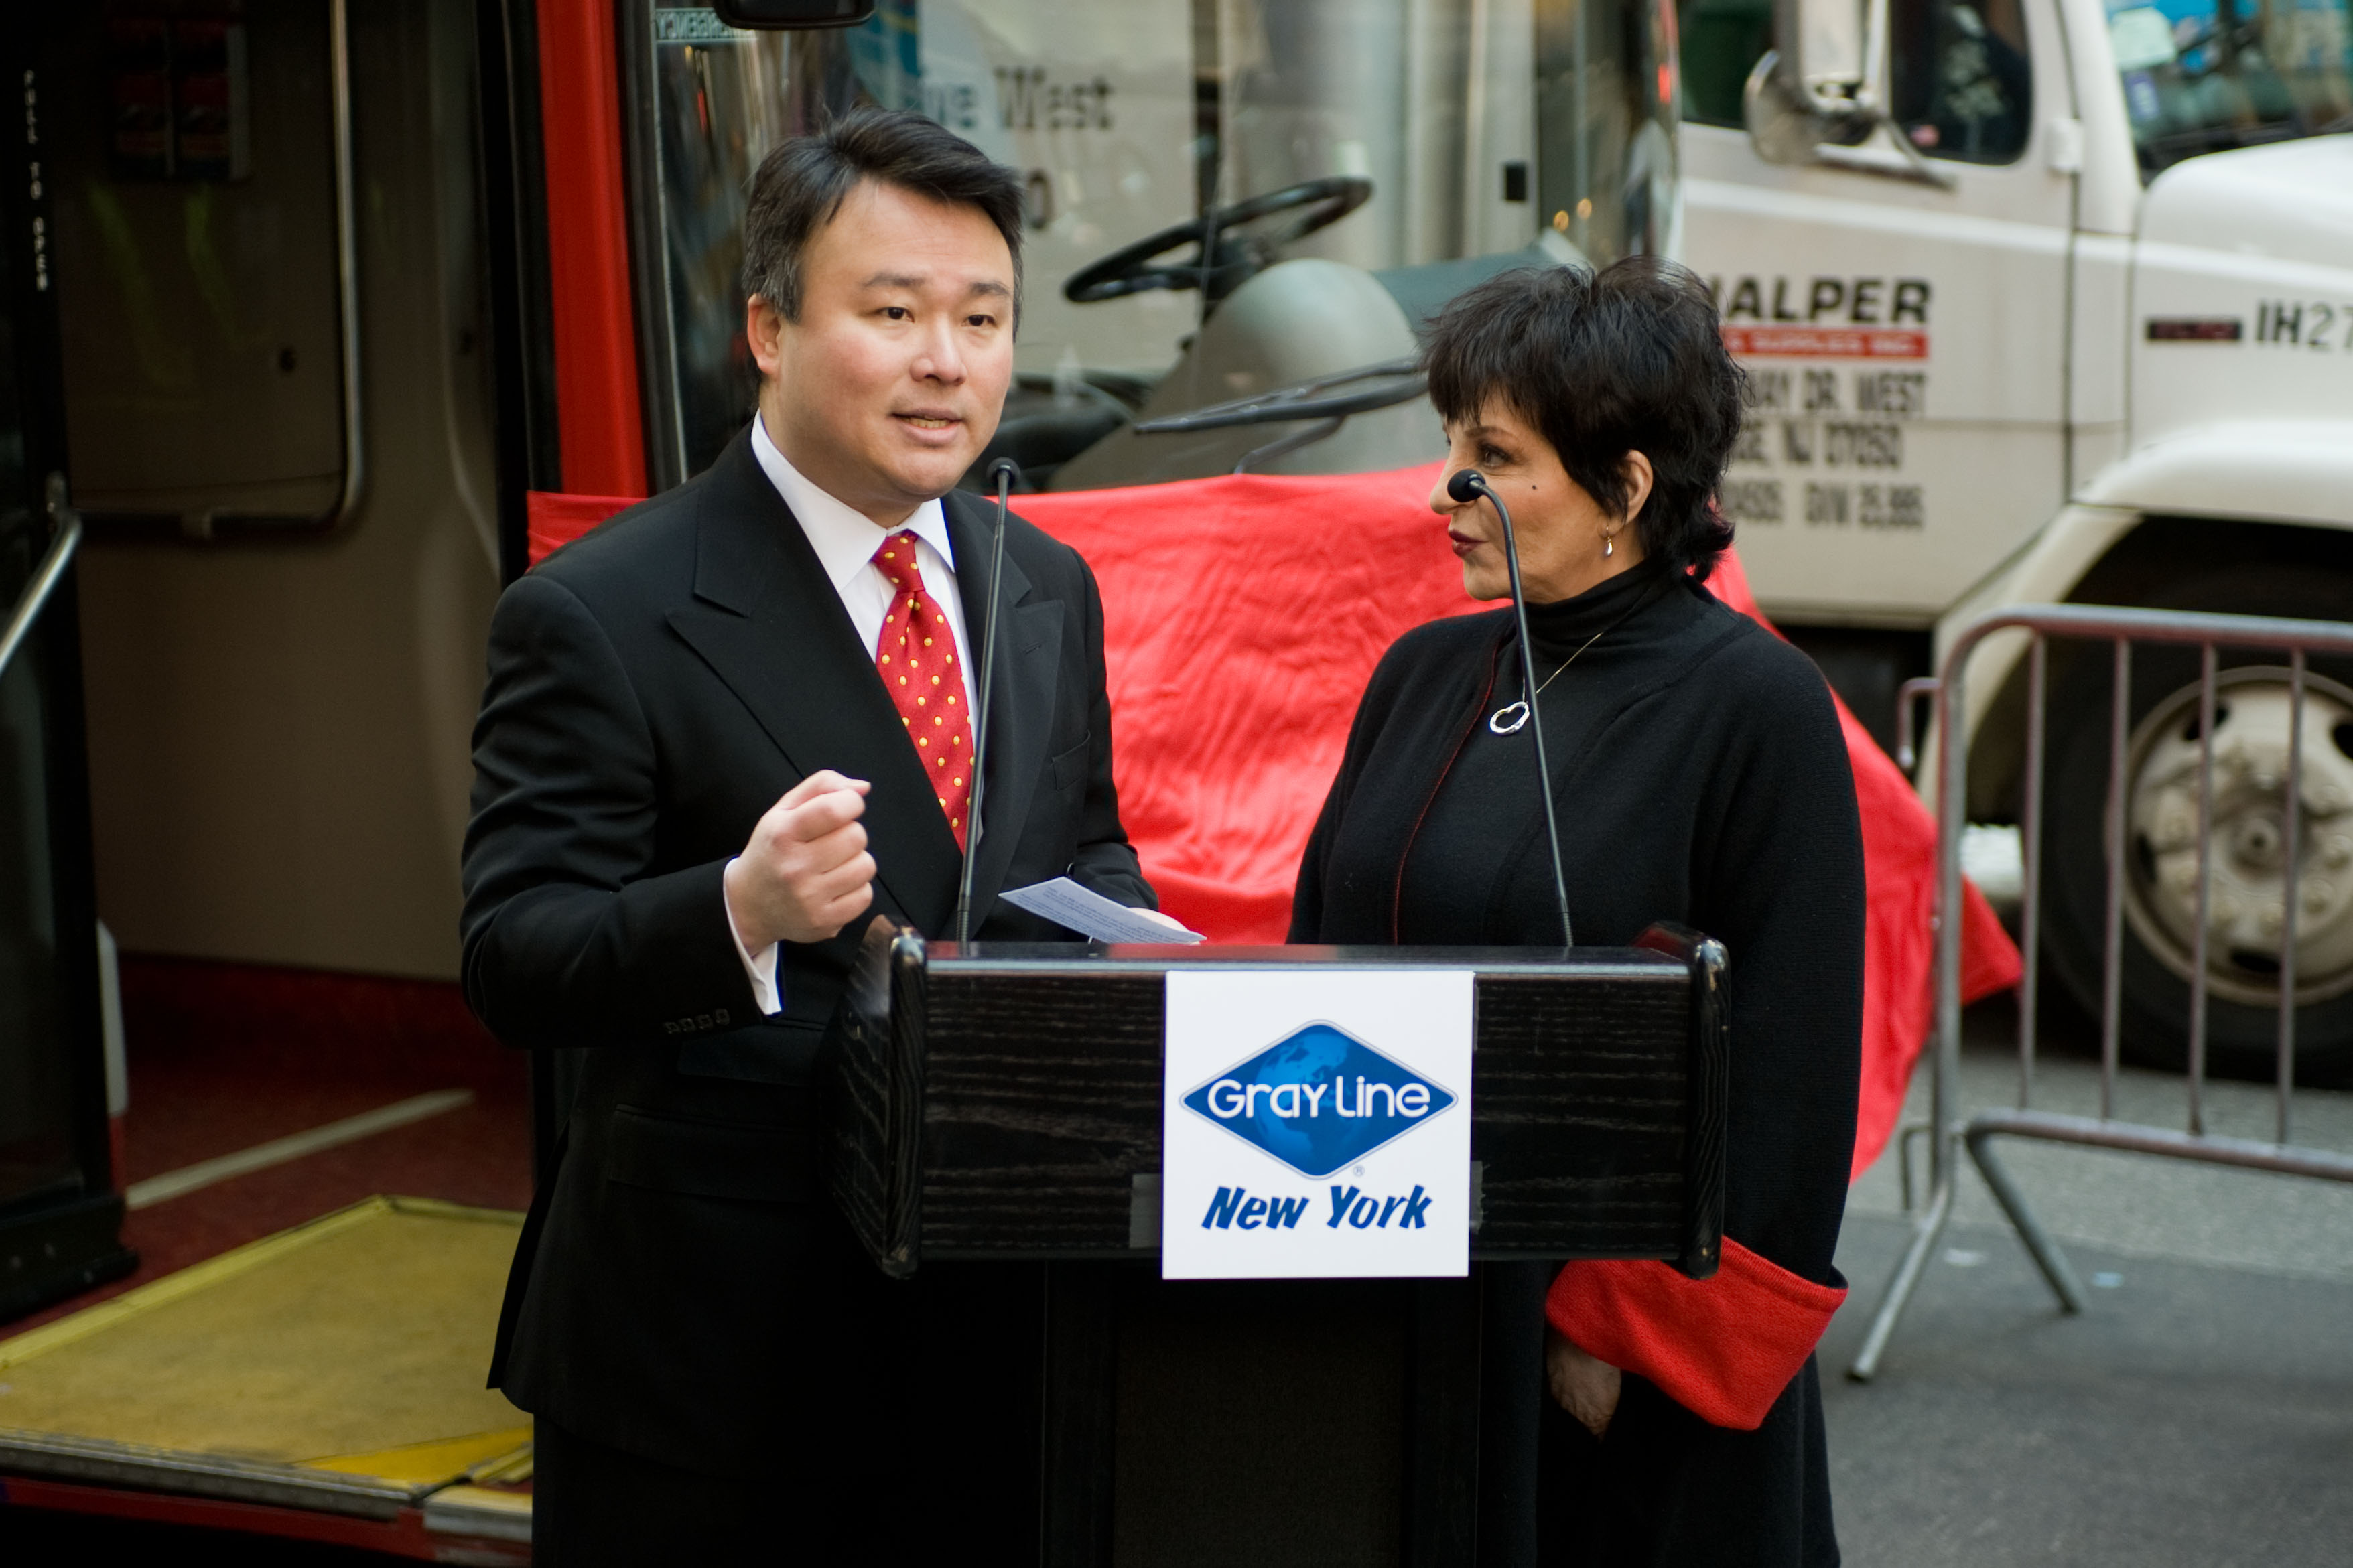 David W. Chien inducts Liza Minnelli to the Ride of Fame (March 8th, 2011).